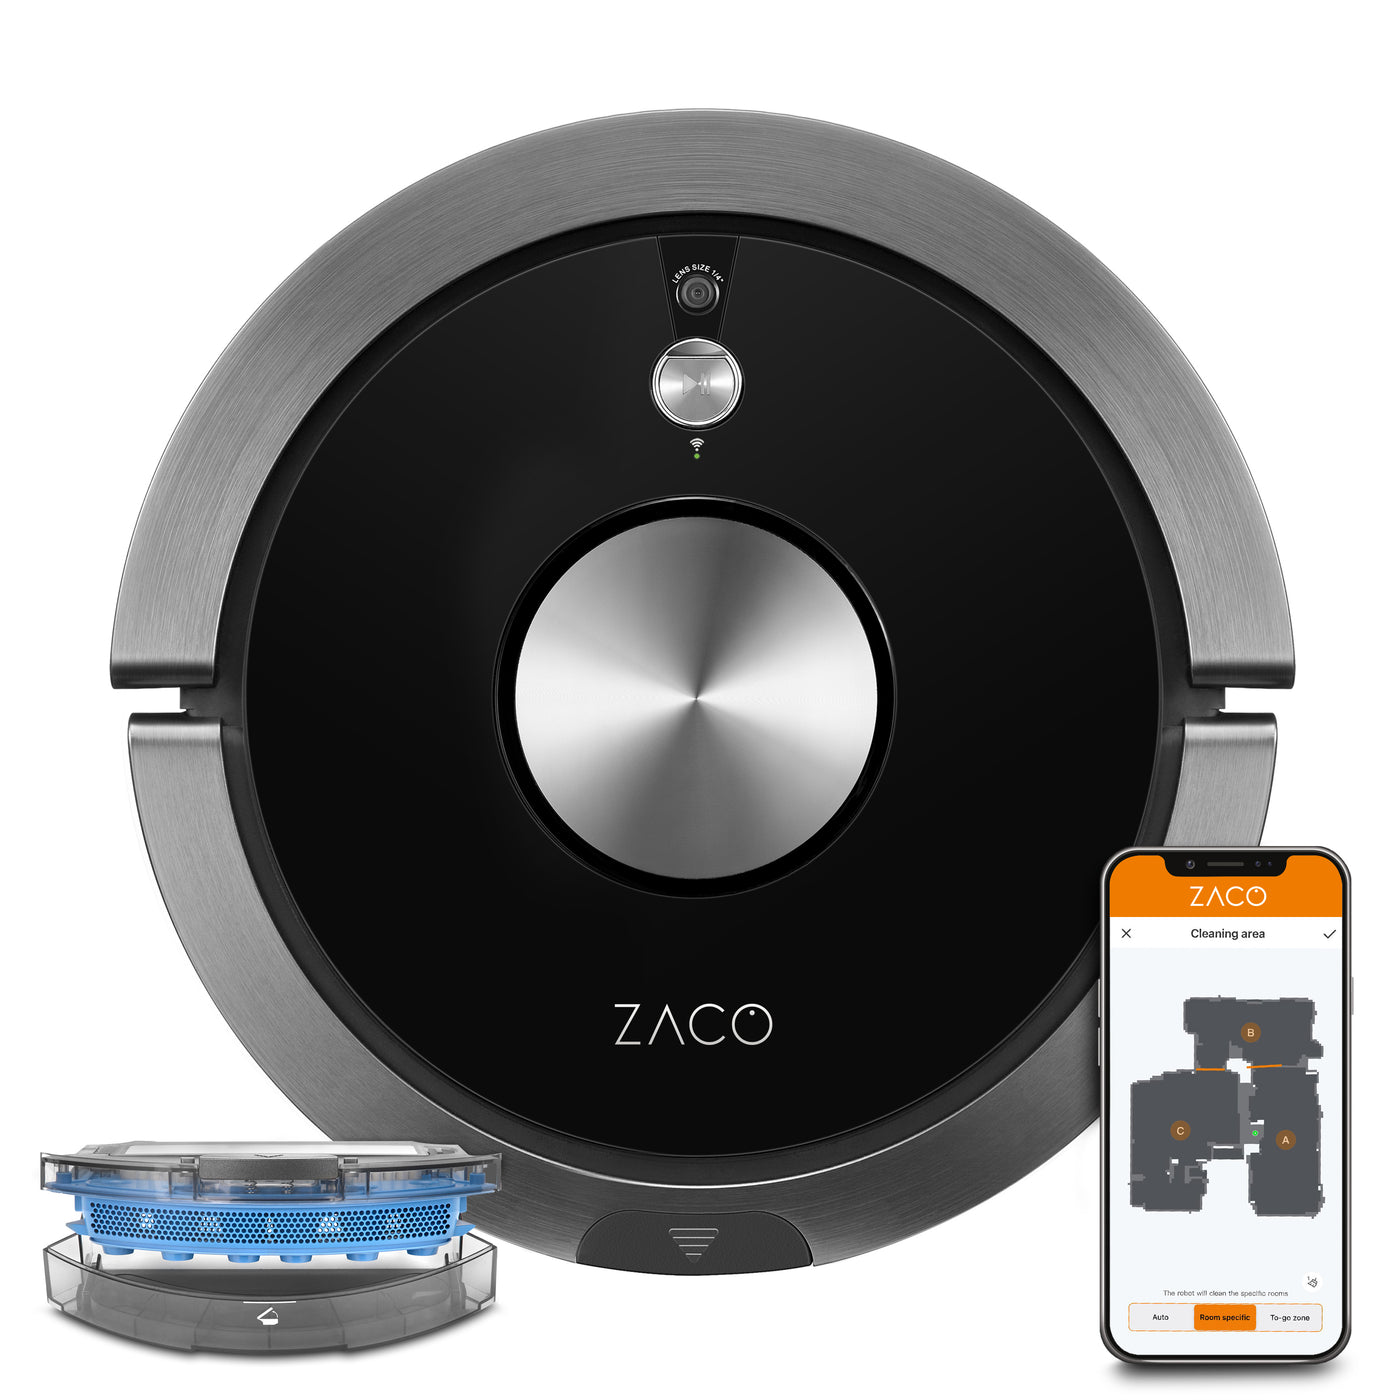 ZACO A9sPro vacuuming and mopping robot